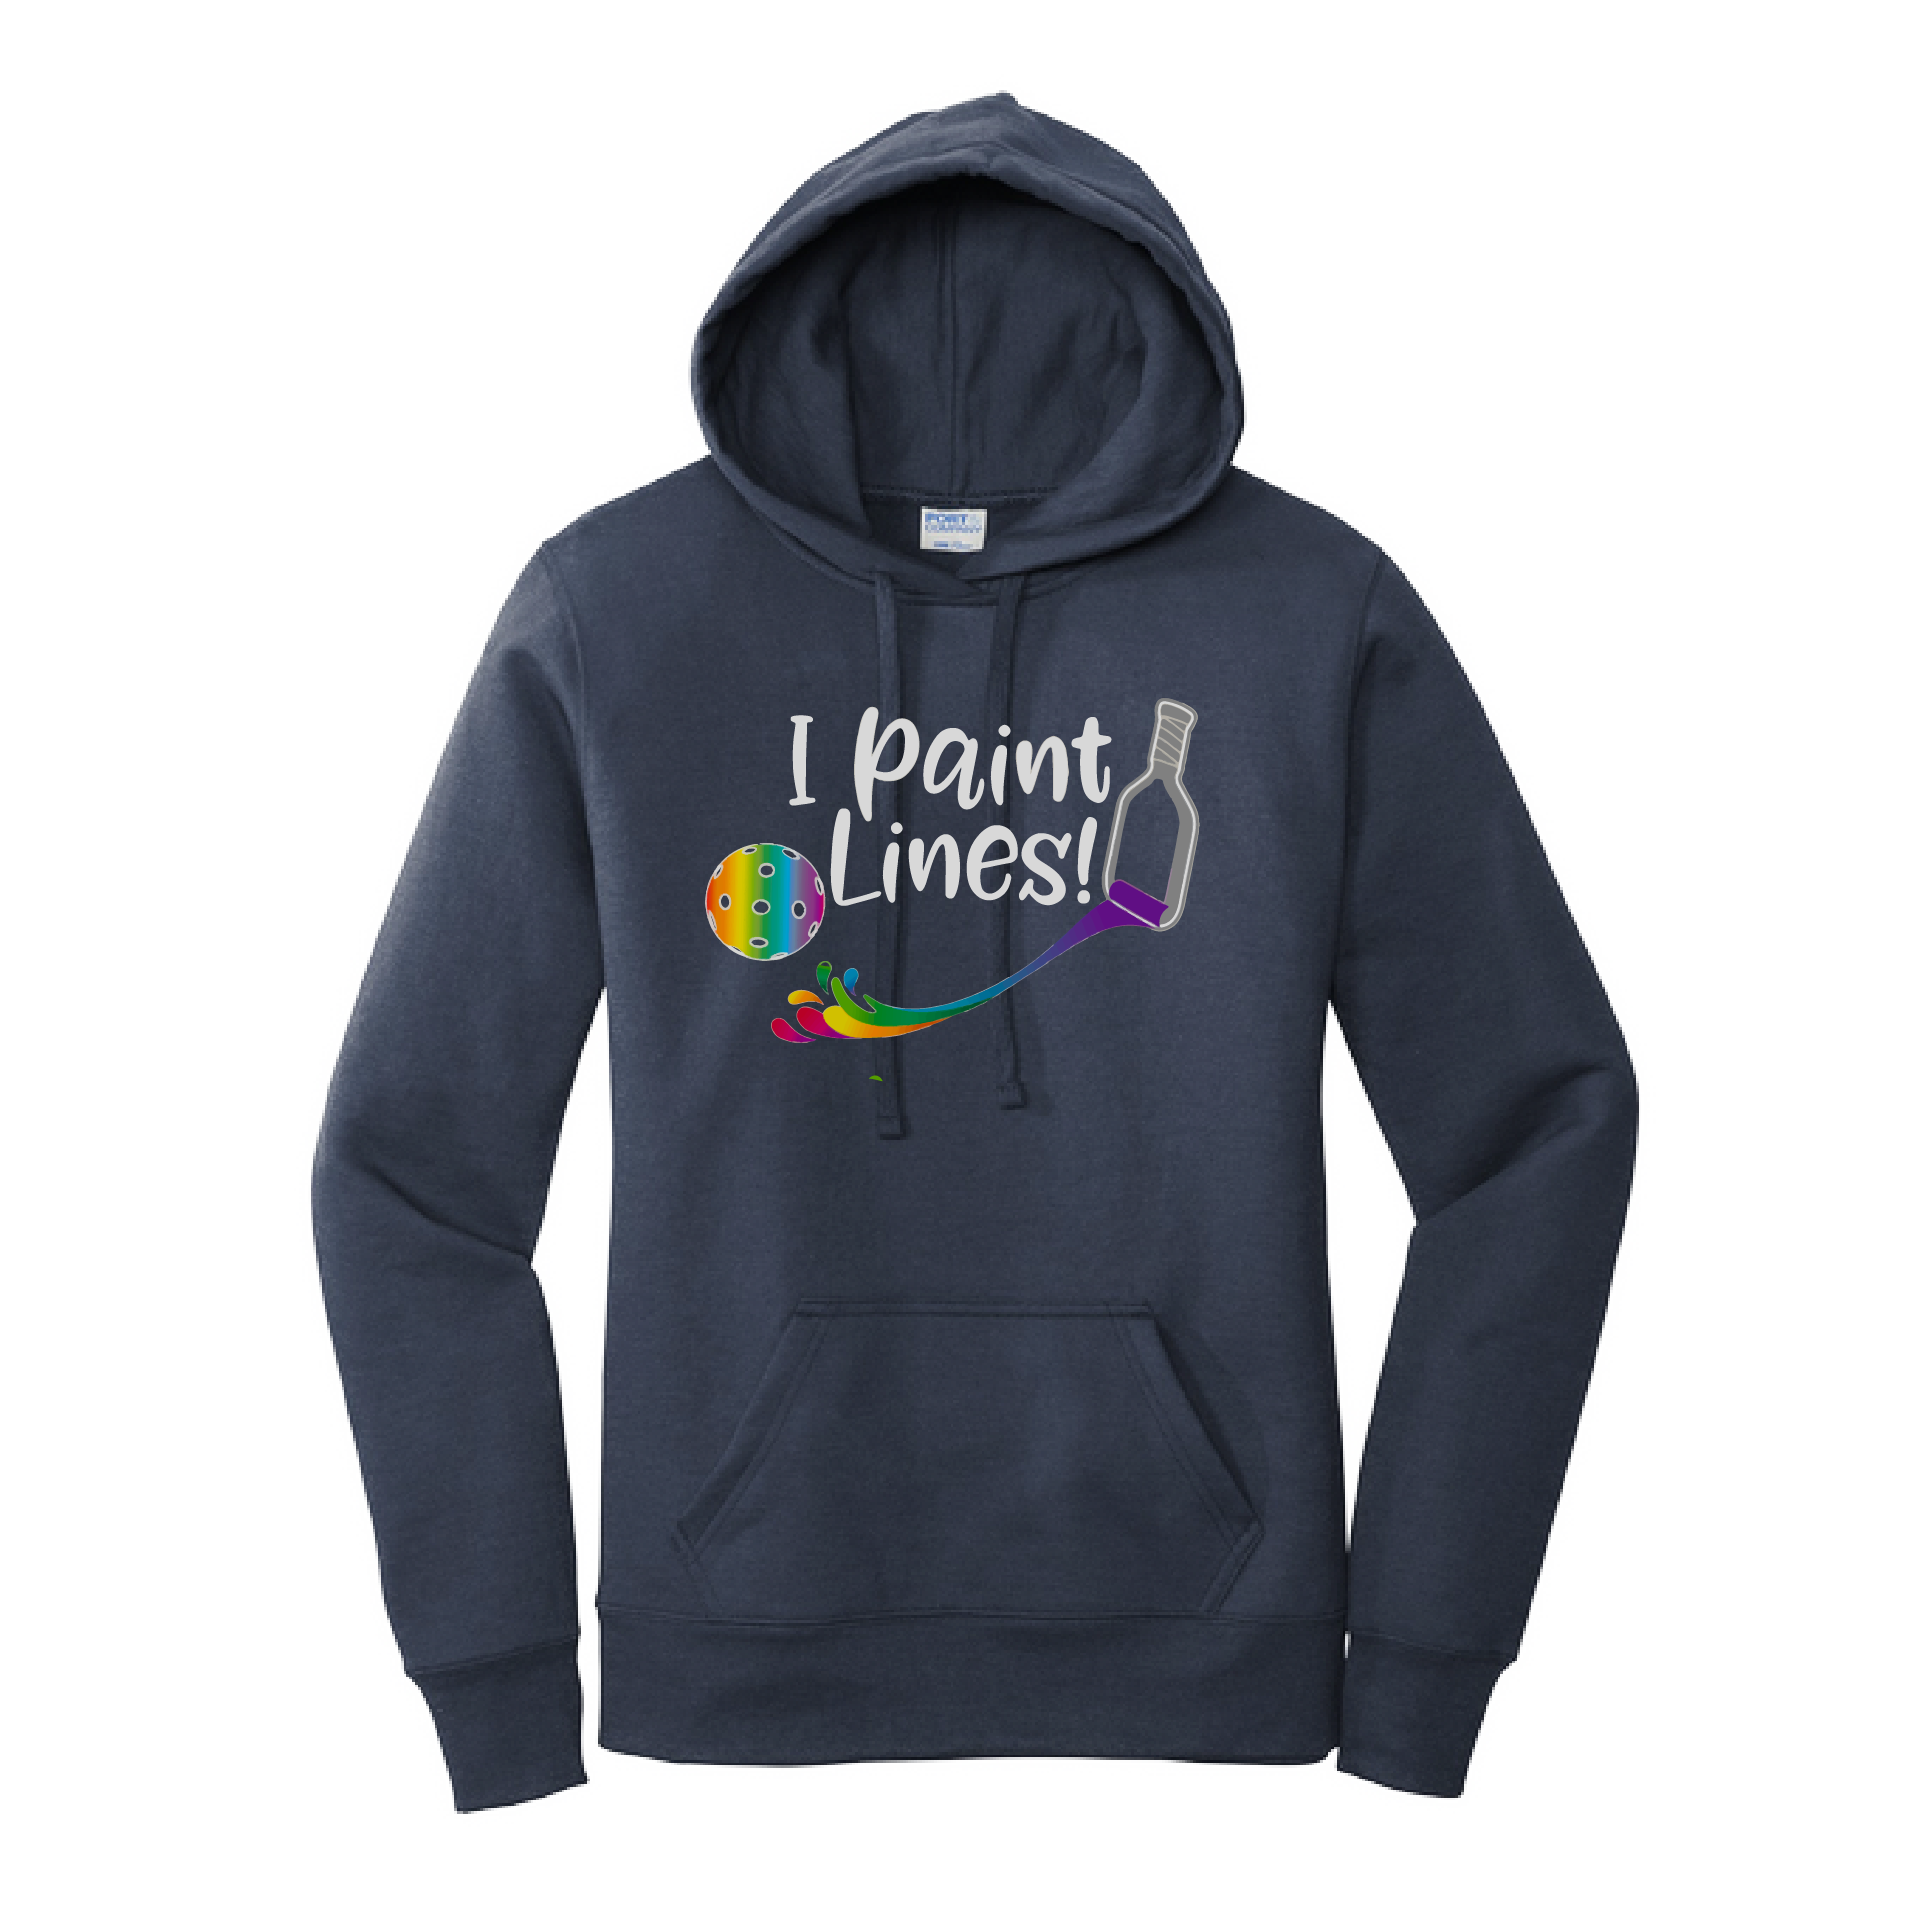 Pickleball Design: I Paint Lines  Women's Hooded pullover Sweatshirt  Turn up the volume in this Women's Sweatshirts with its perfect mix of softness and attitude. Ultra soft lined inside with a lined hood also. This is fitted nicely for a women's figure. Front pouch pocket.